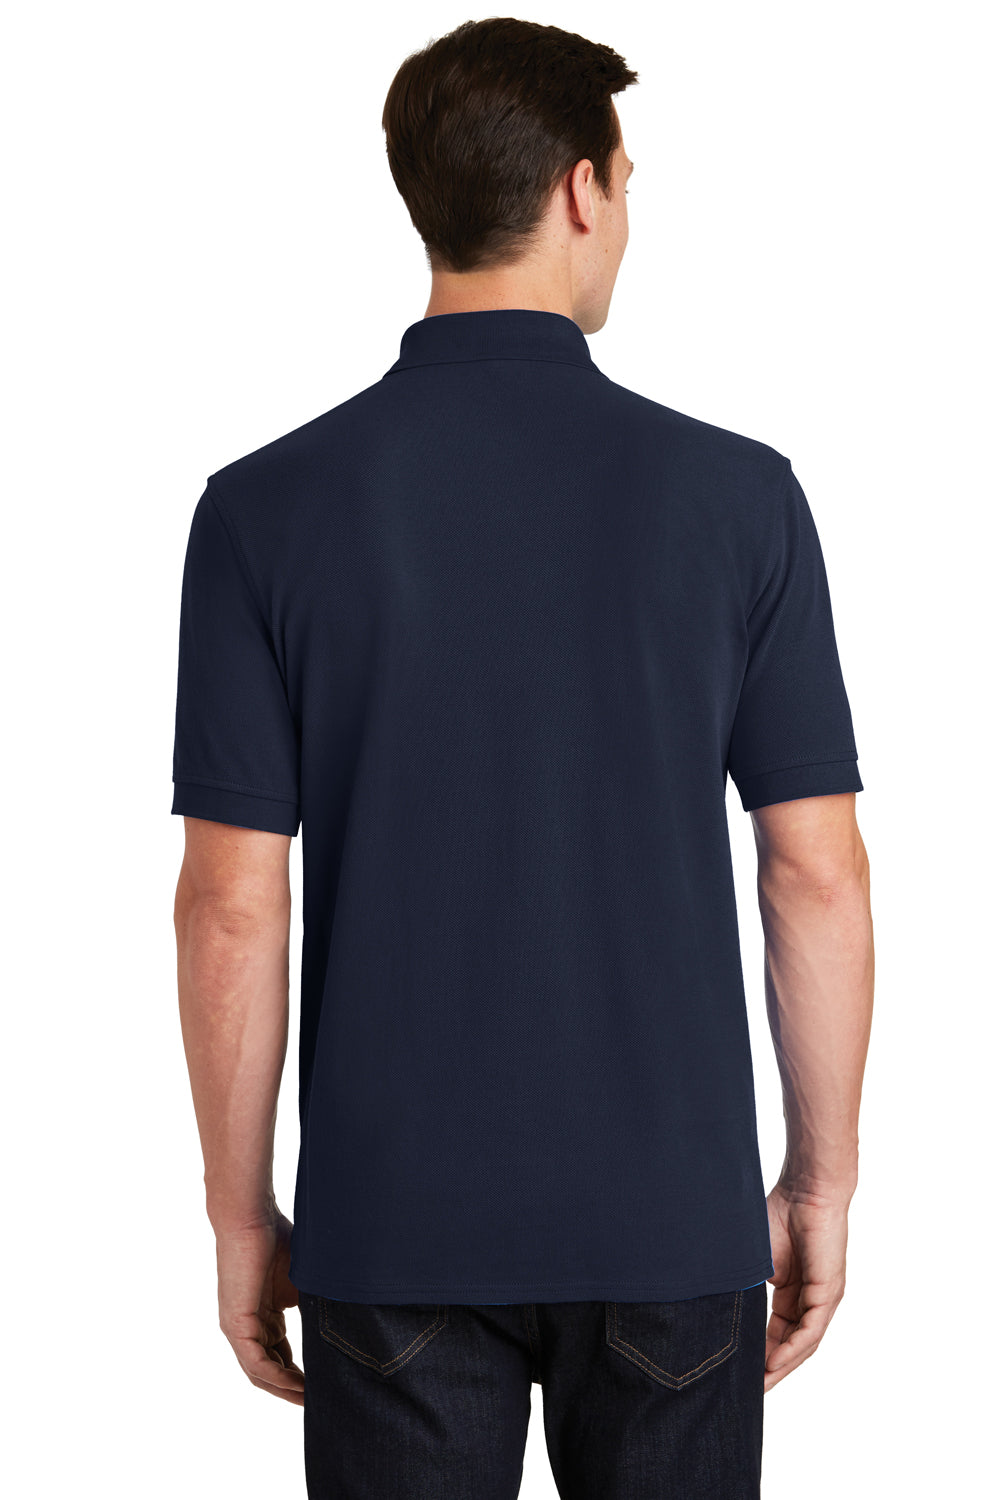 Port & Company KP1500 Mens Stain Resistant Short Sleeve Polo Shirt Navy Blue Back